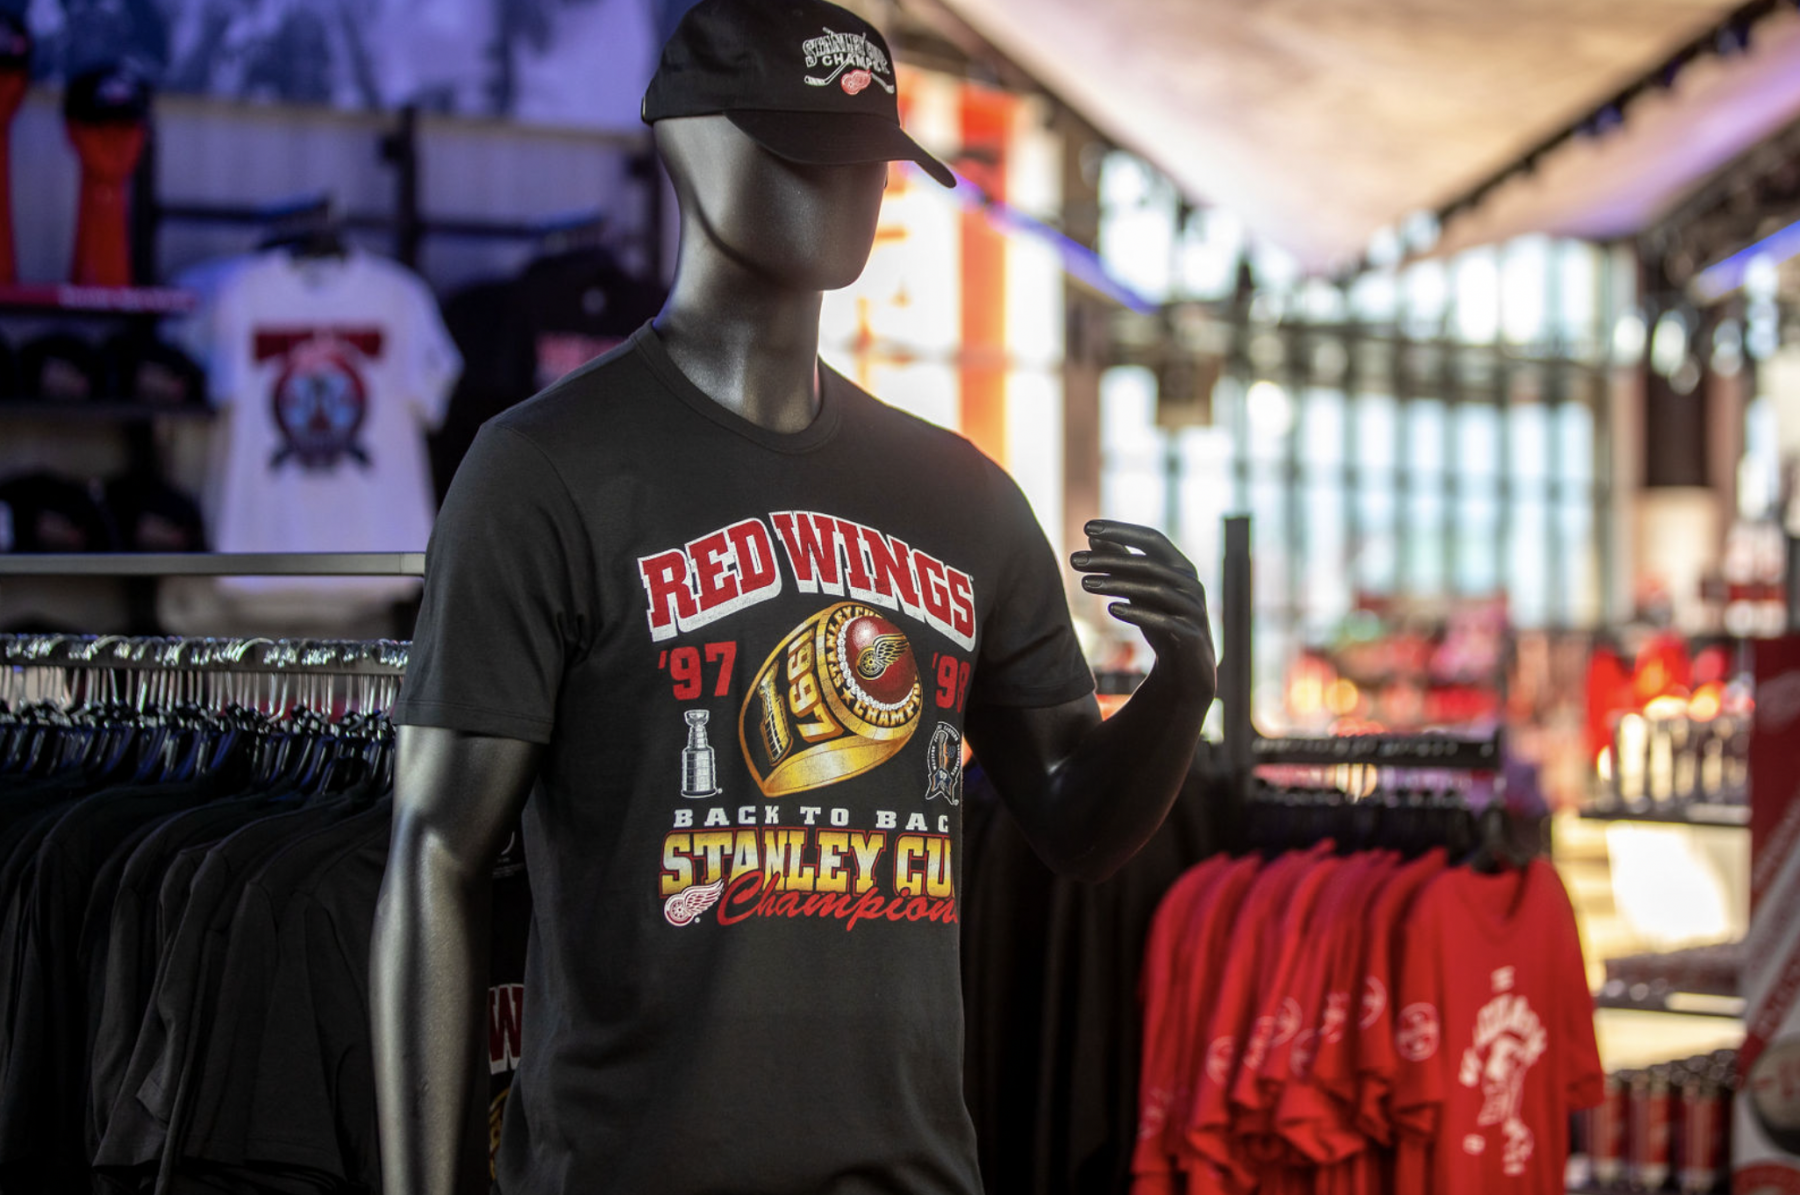 Detroit Red Wings 25th Anniversary Merchandise - Ilitch Companies